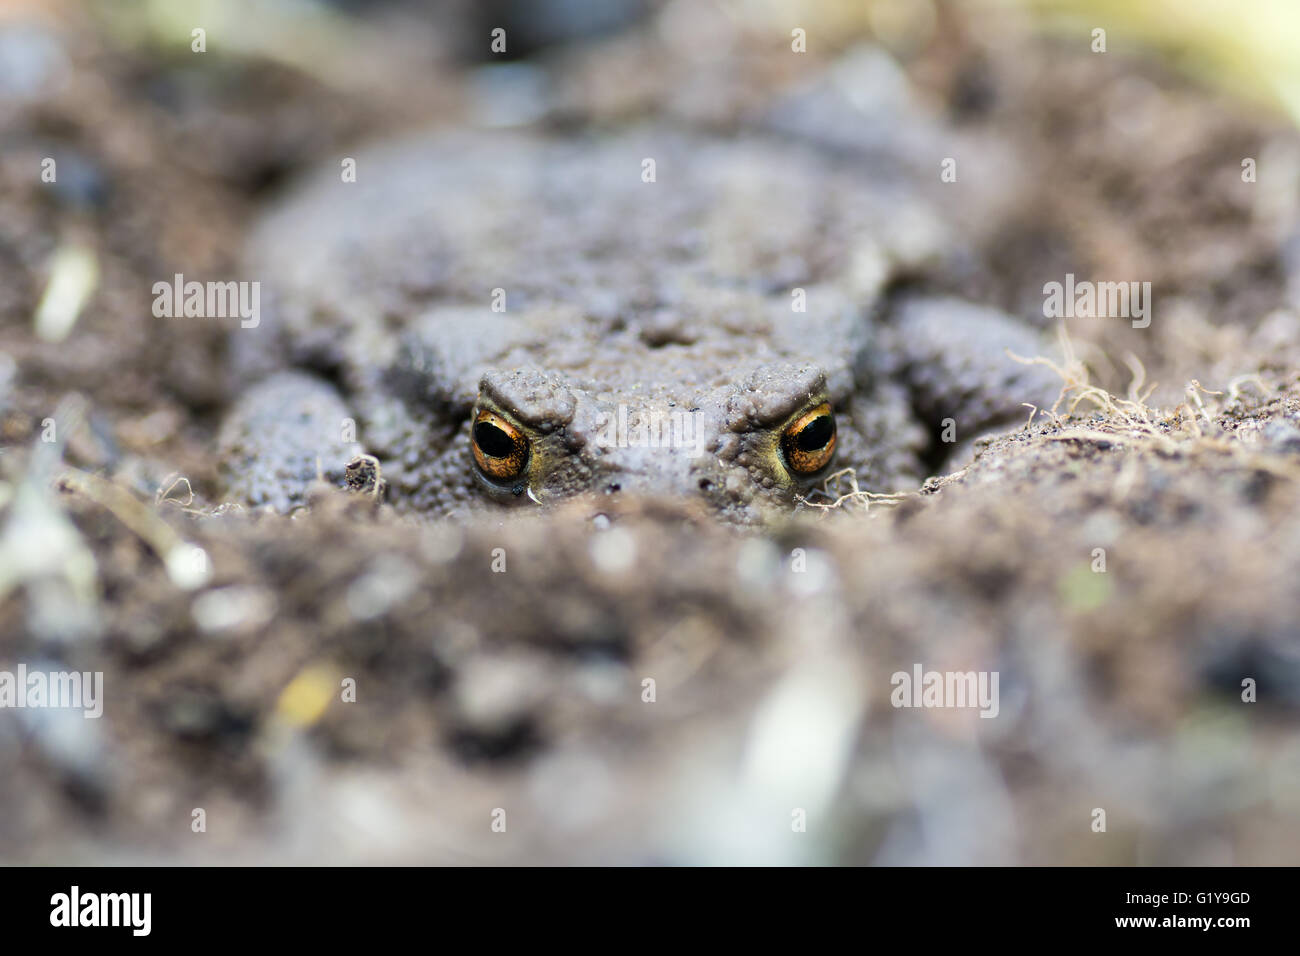 Common toad (Bufo bufo) partially buried in soil. Familiar amphibian hiding on ground, with bright eyes visible Stock Photo